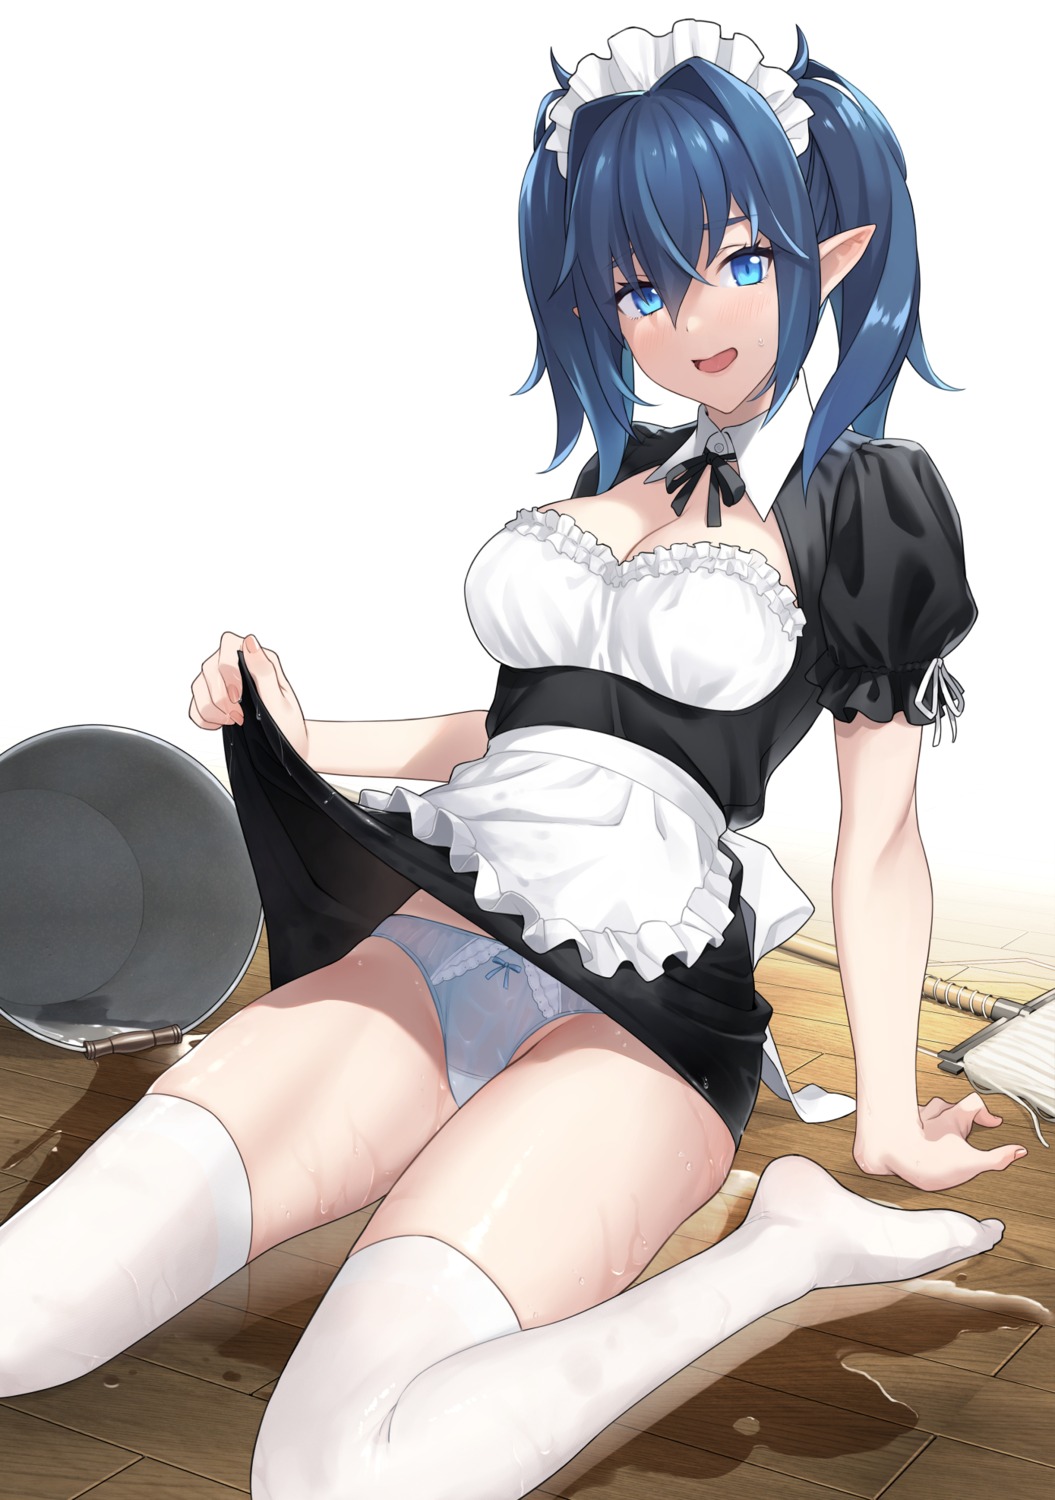 cleavage maid pantsu pointy_ears prime skirt_lift thighhighs wet